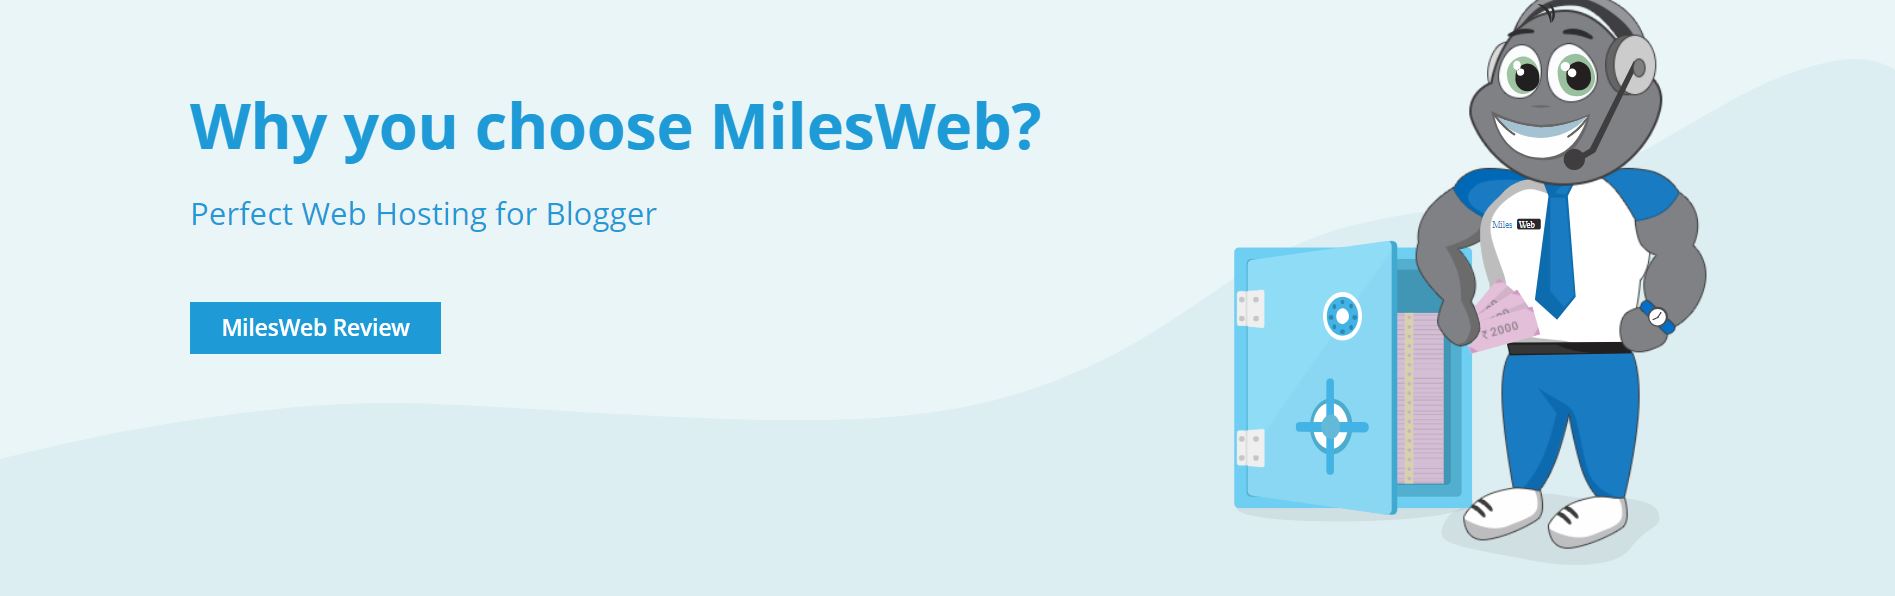 Why you choose MilesWeb - Perfect Web Hosting for Blogger.